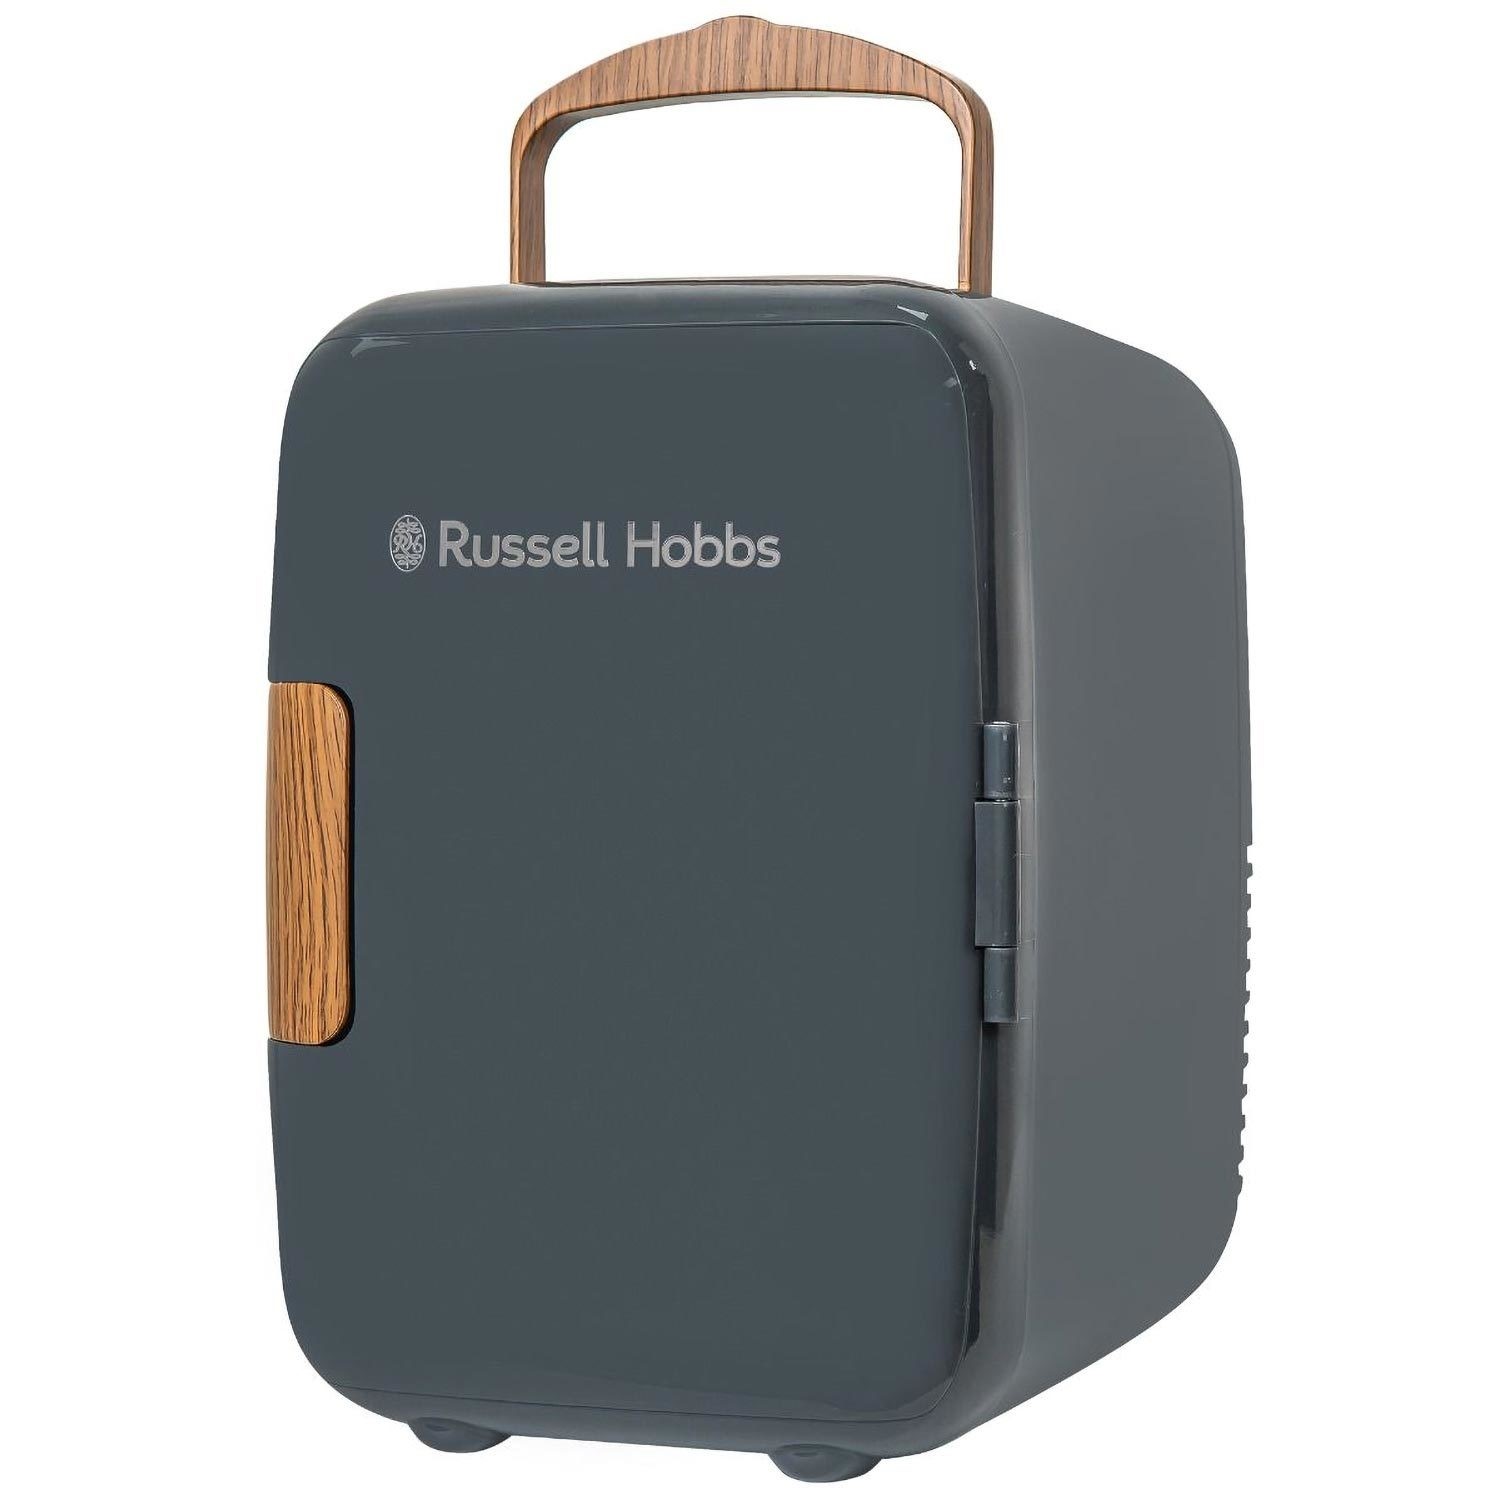 Photos - Other for Computer Russell Hobbs Scandi 4 Litre Portable Mini Cooler & Warmer - Gloss RH4 